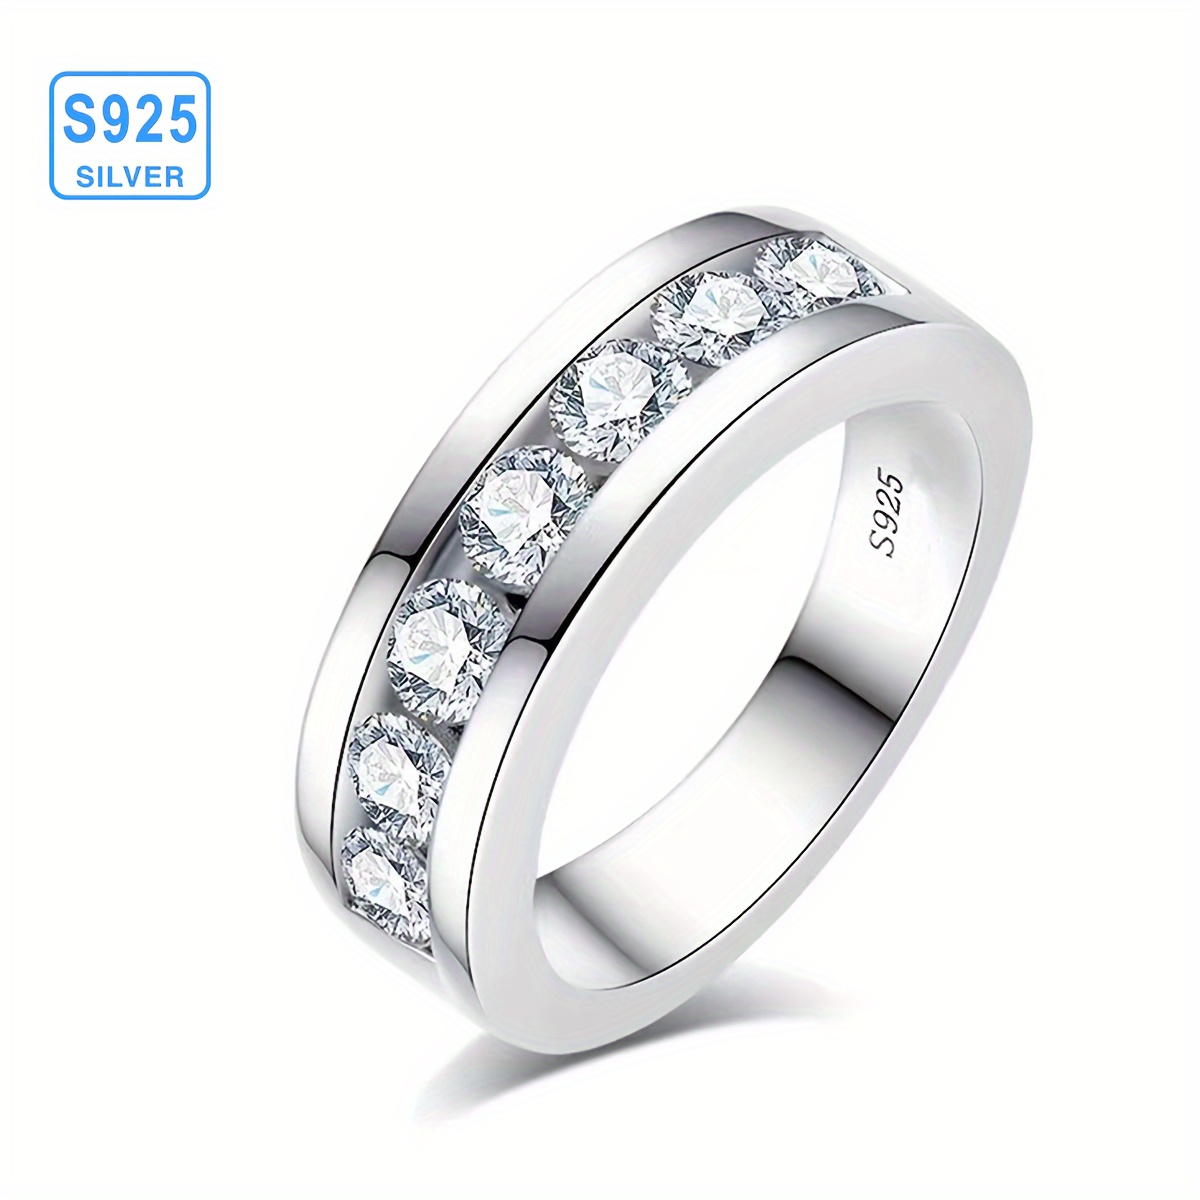 

1pc Retro And Fashion 2.1ct Moissanite Silver Ring, For Birthdays, Anniversaries, And Graduation Christmas Gifts